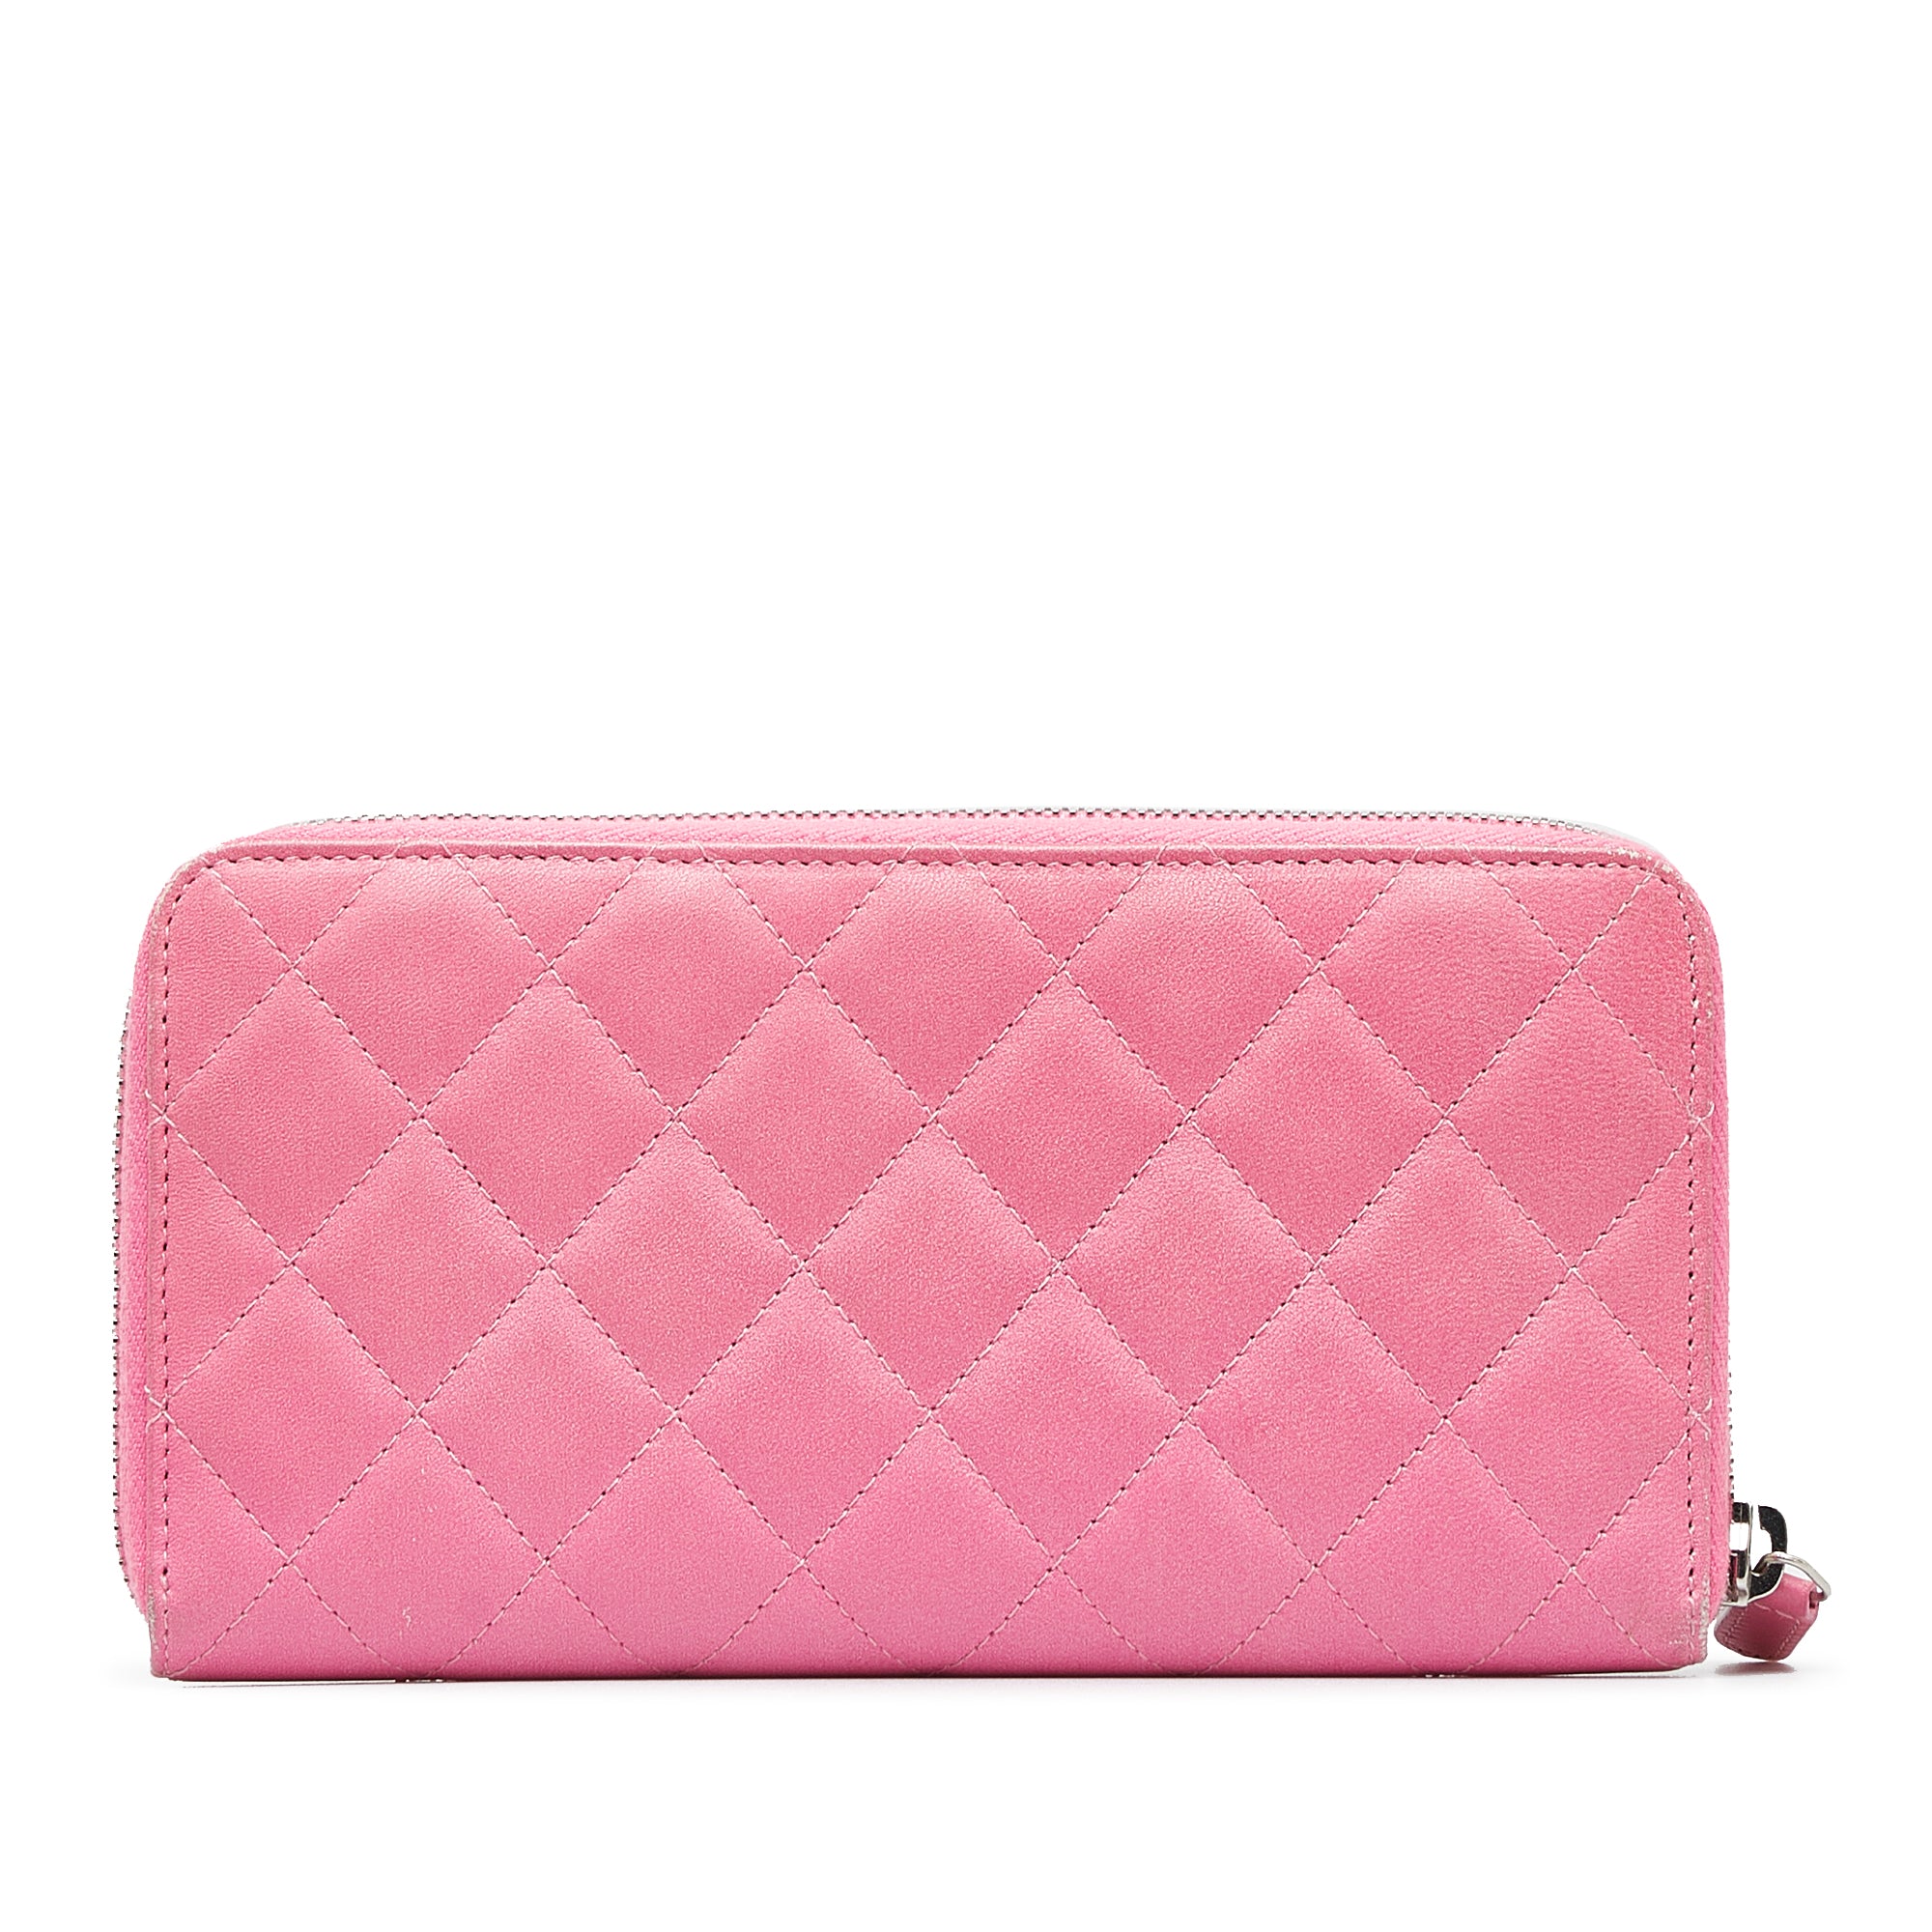 Chanel Pink Quilted Zip Wallet